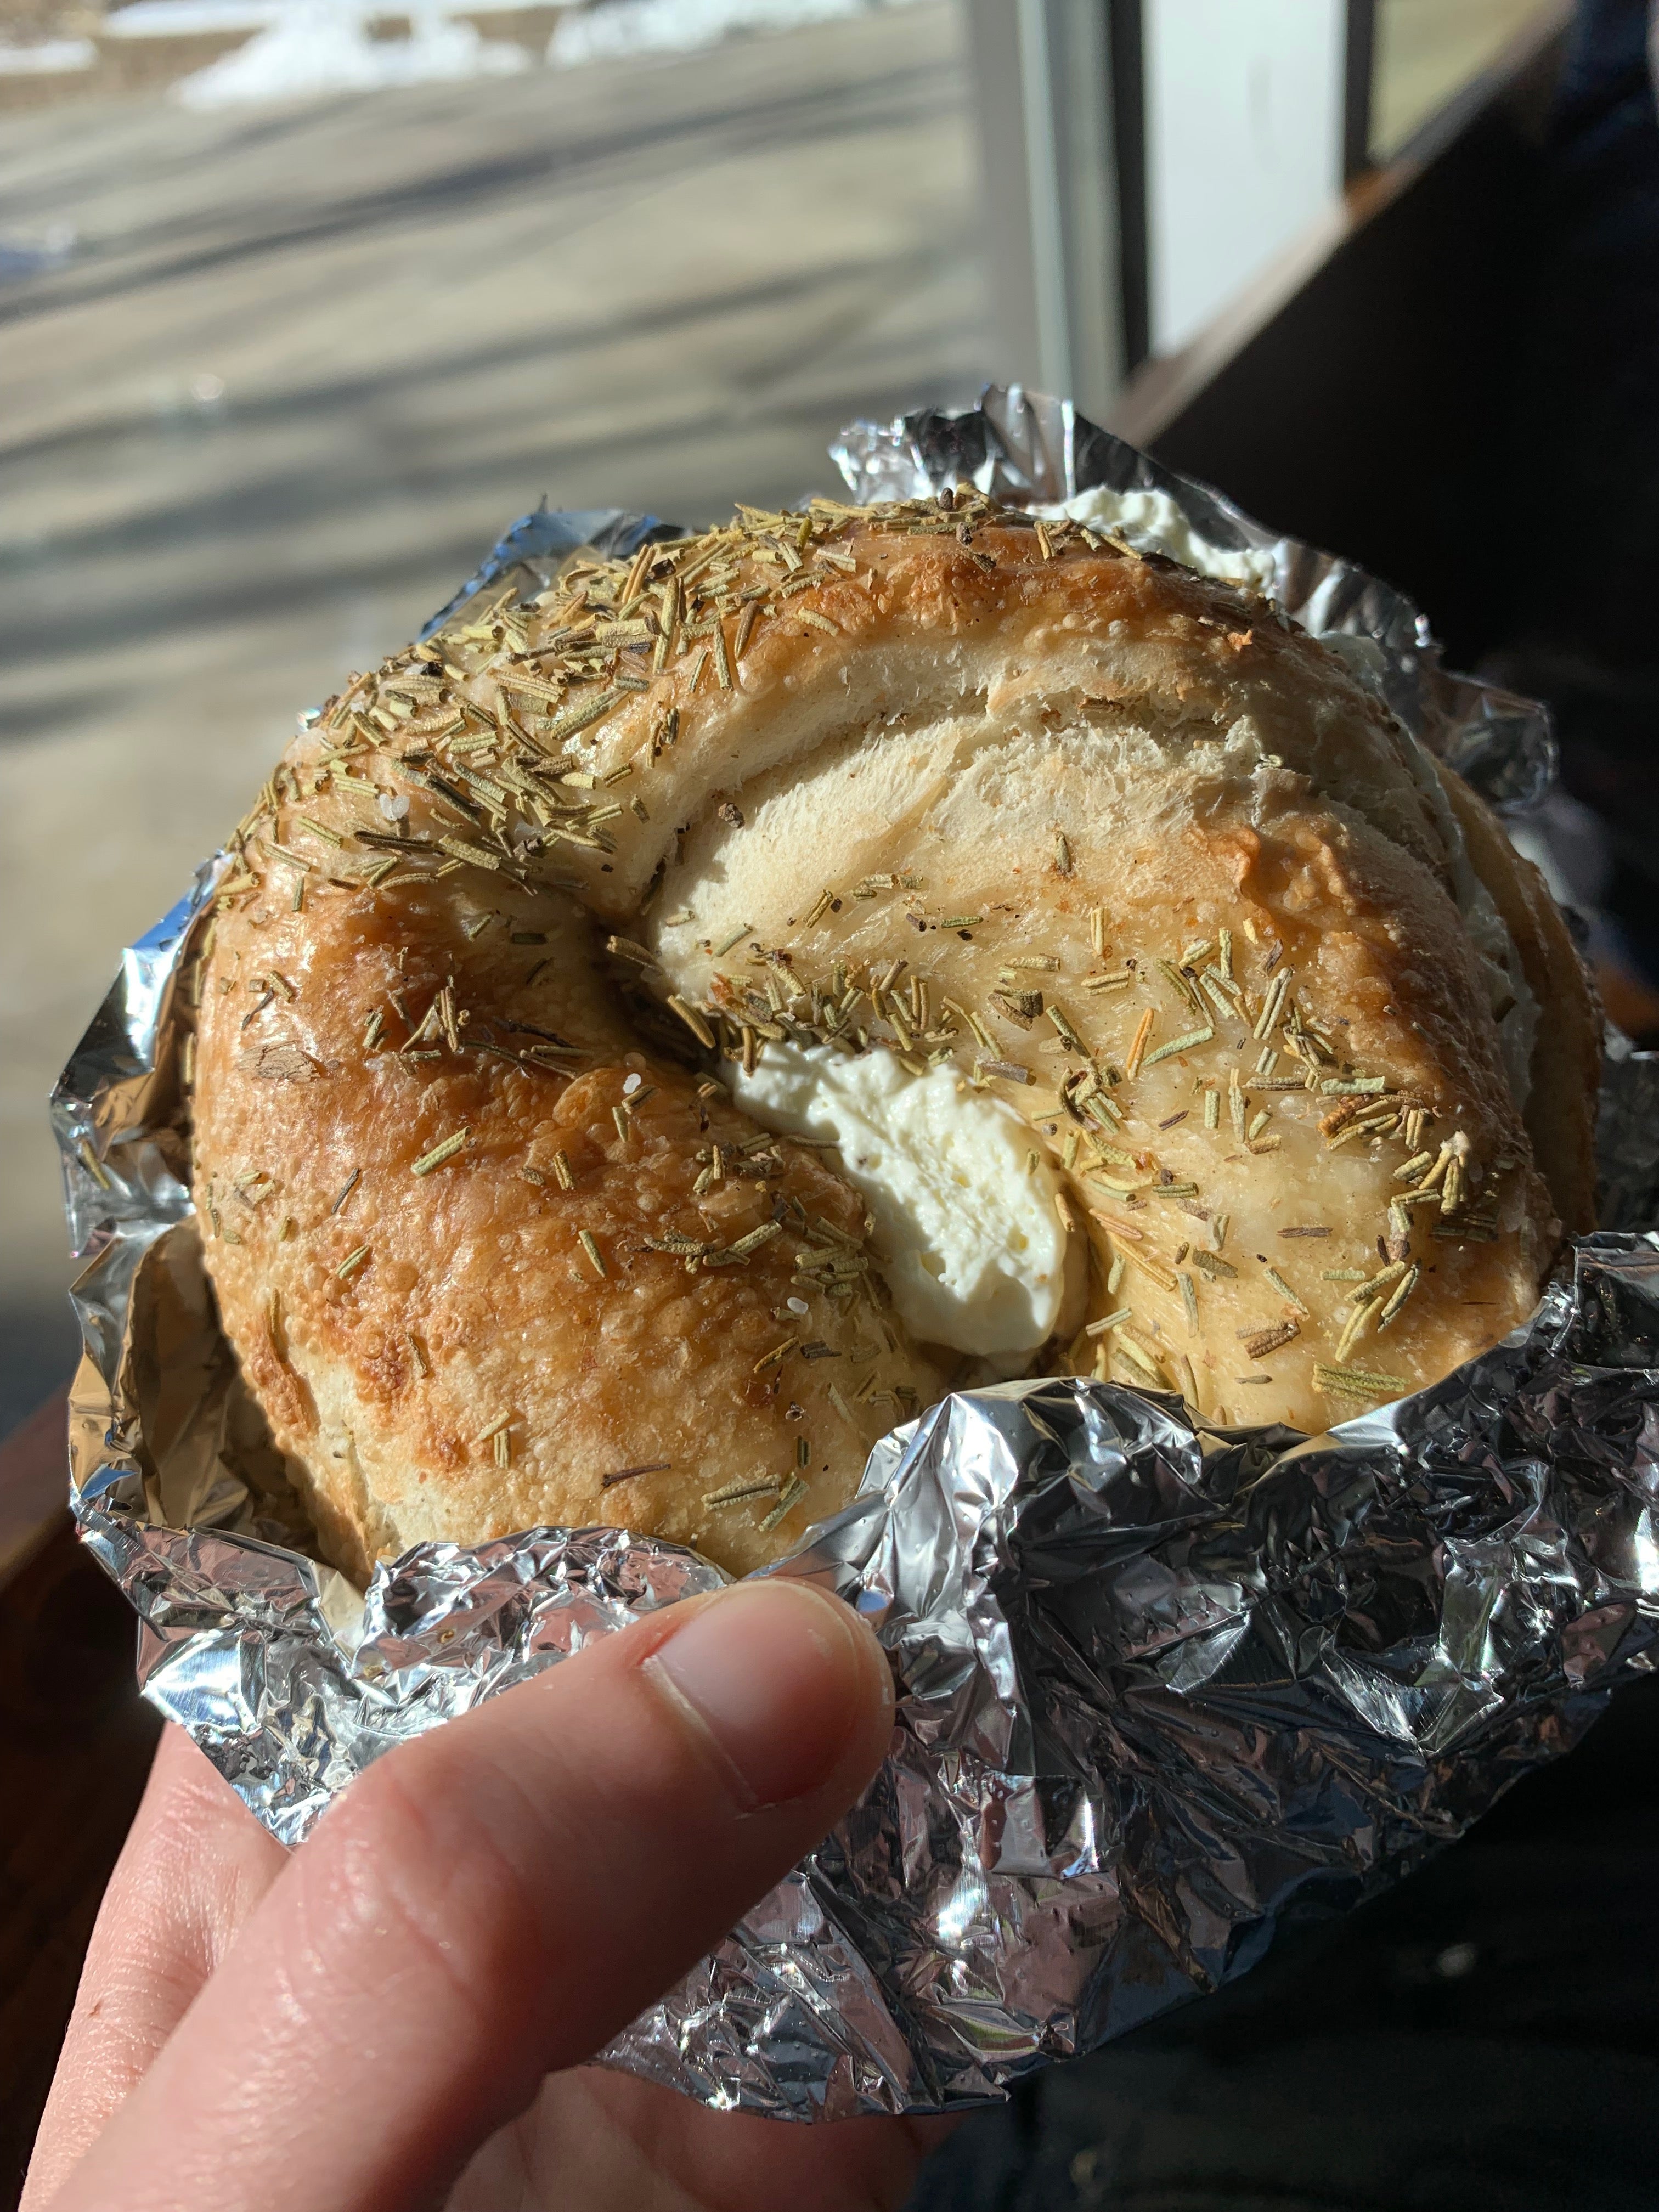 a hand gently caresses a bagel with rosemary and cream cheese, wrapped in foil, on a sunny day